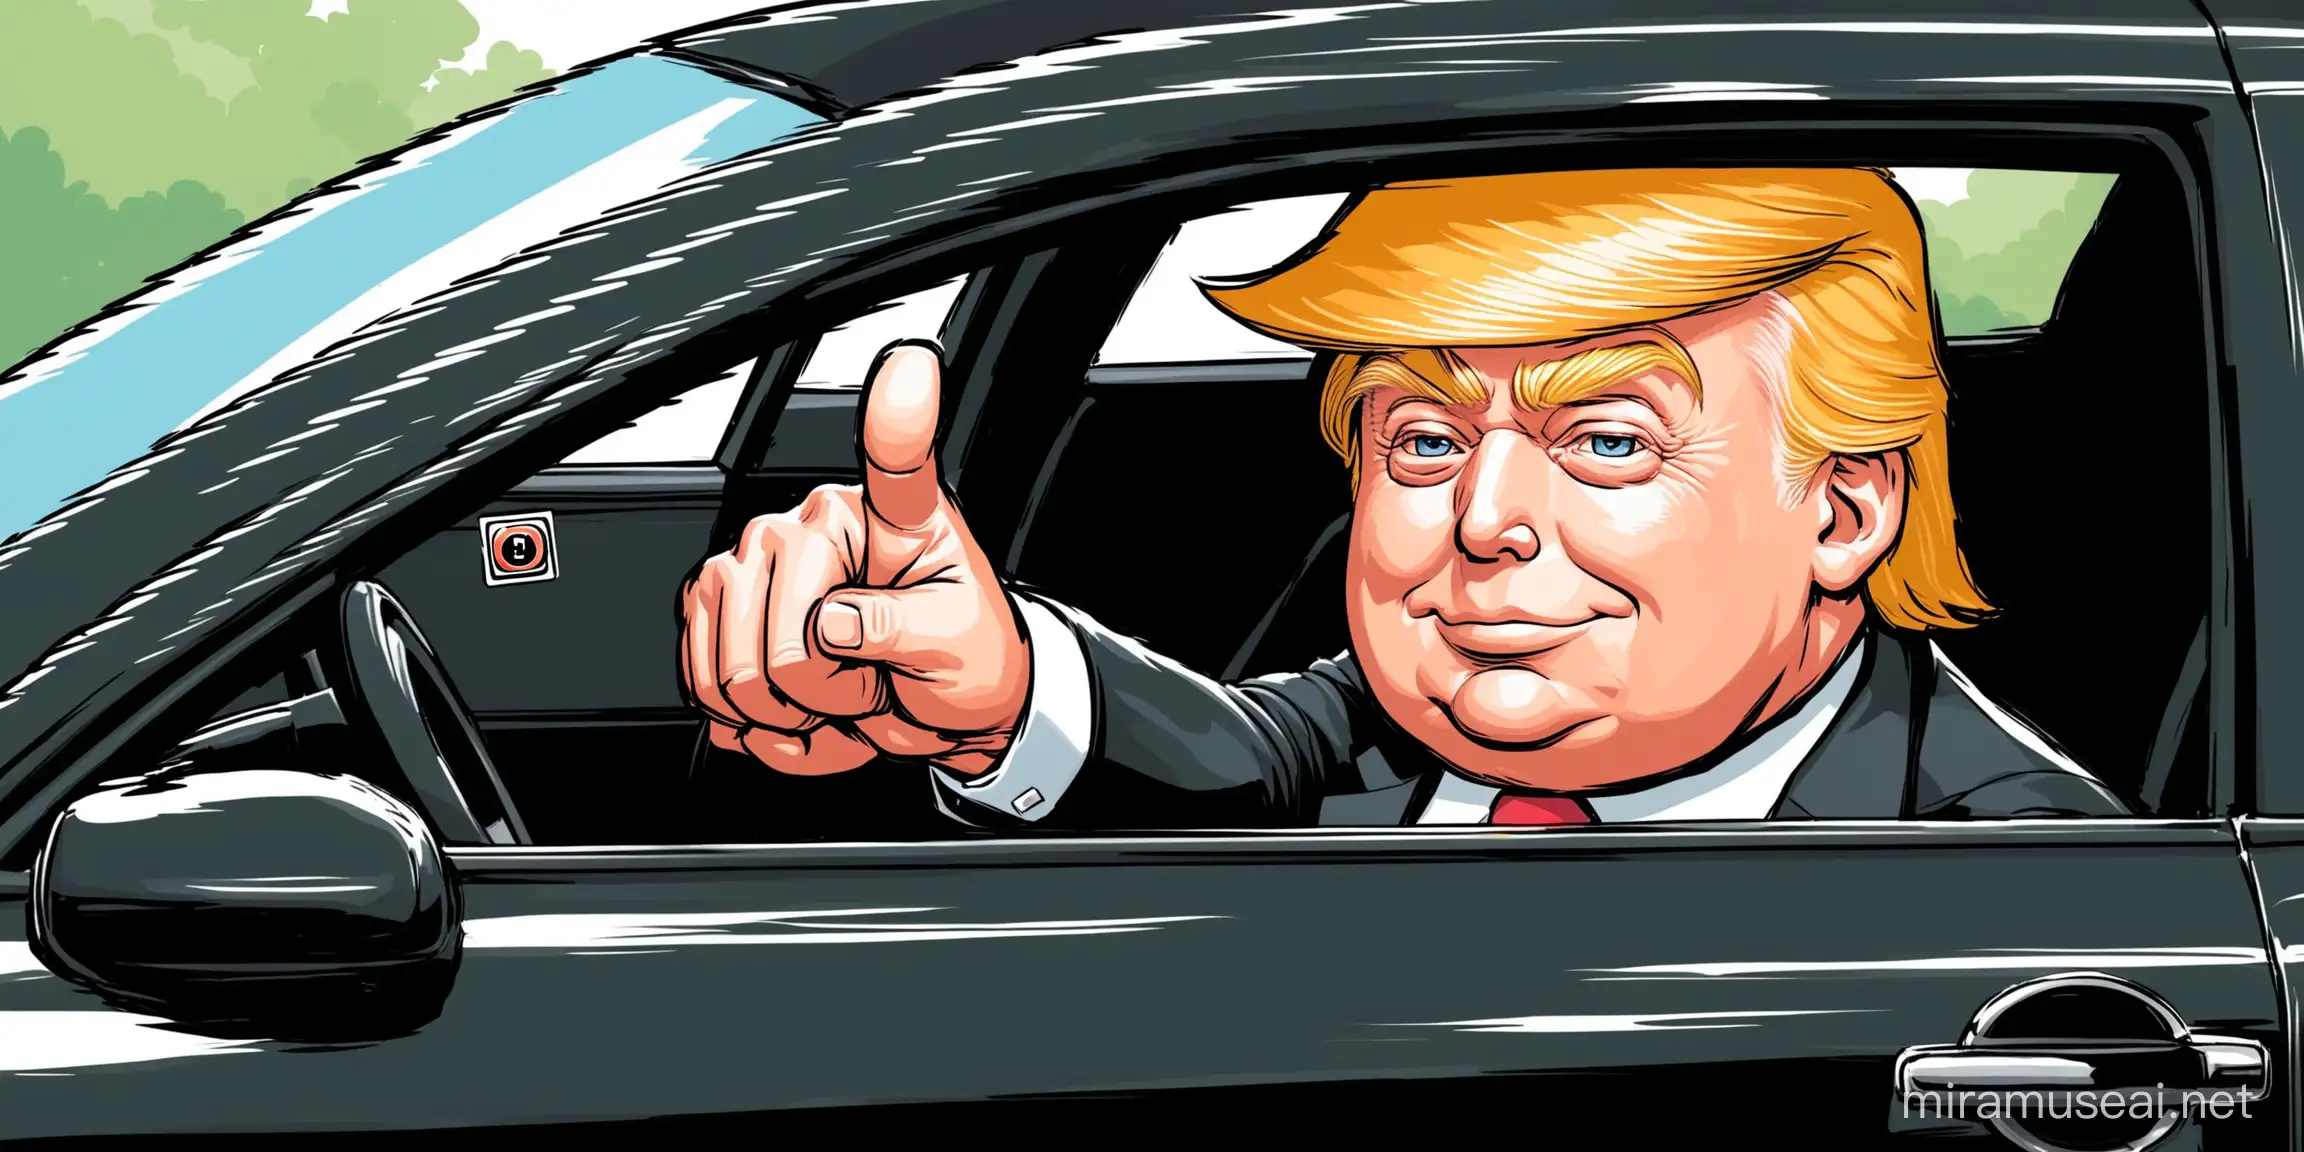 Create a photo of President Donald Trump sitting in the black car looking out the window and holding up a like button with one hand, in a lovely cartoon style
